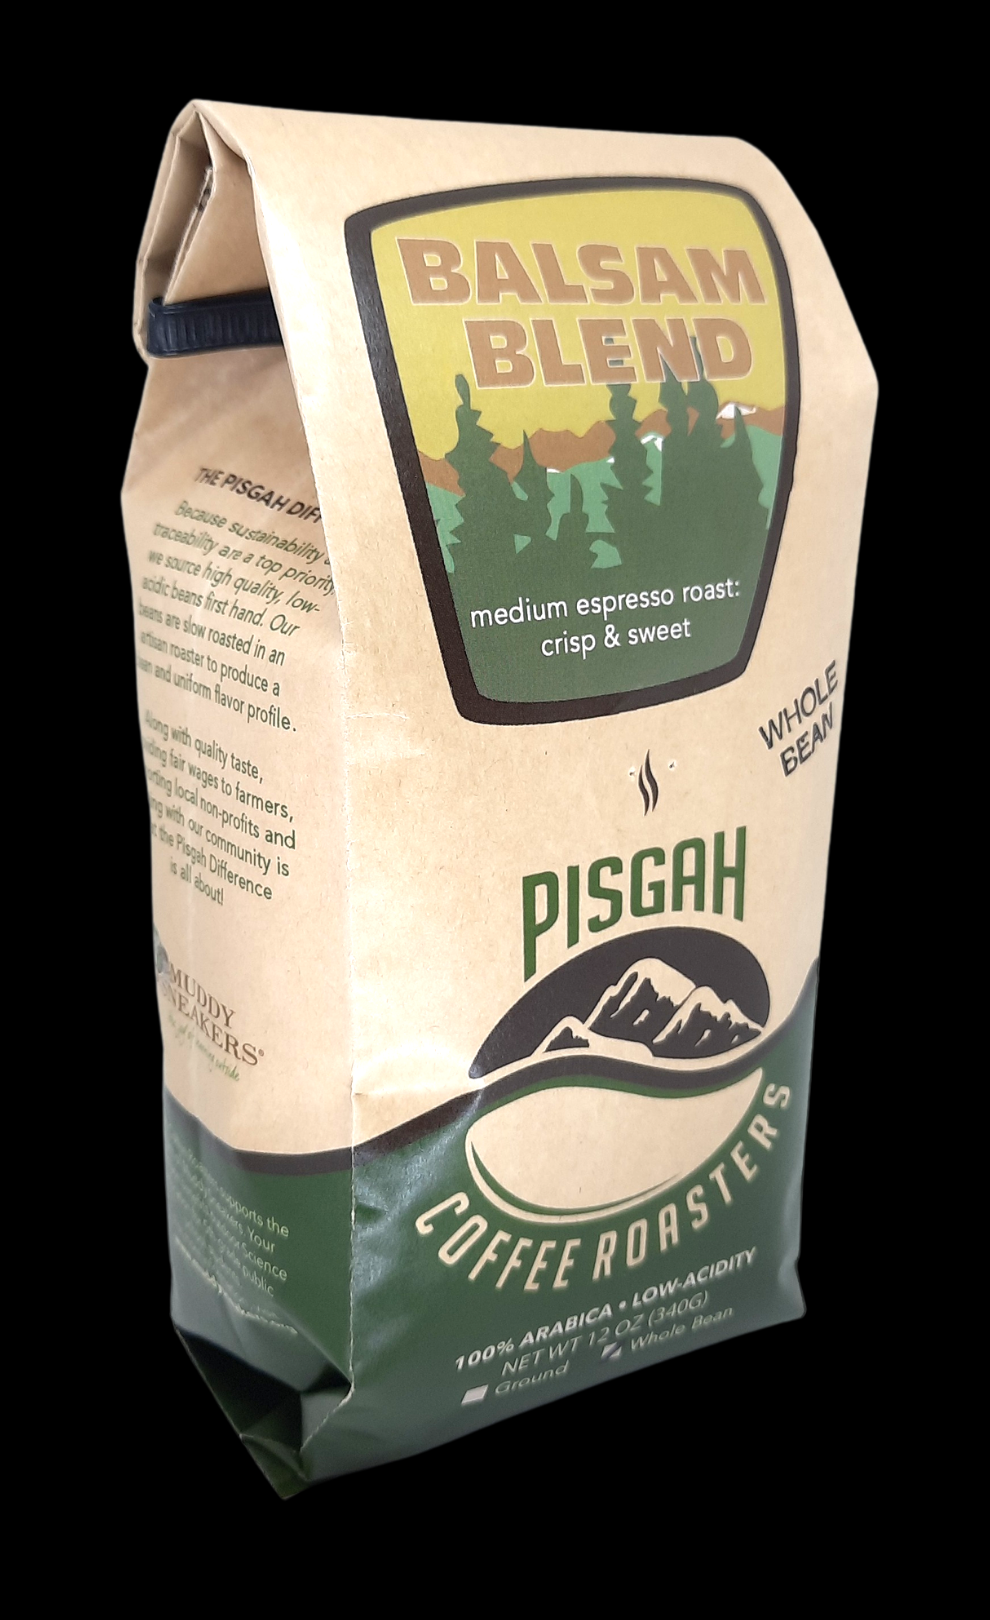 Our coffee shop's go-to espresso roast! This European-style medium roast is double-roasted, sweet, crisp and full-bodied. It packs a stunningly smooth finish whether you brew for espresso, pour-over or drip.